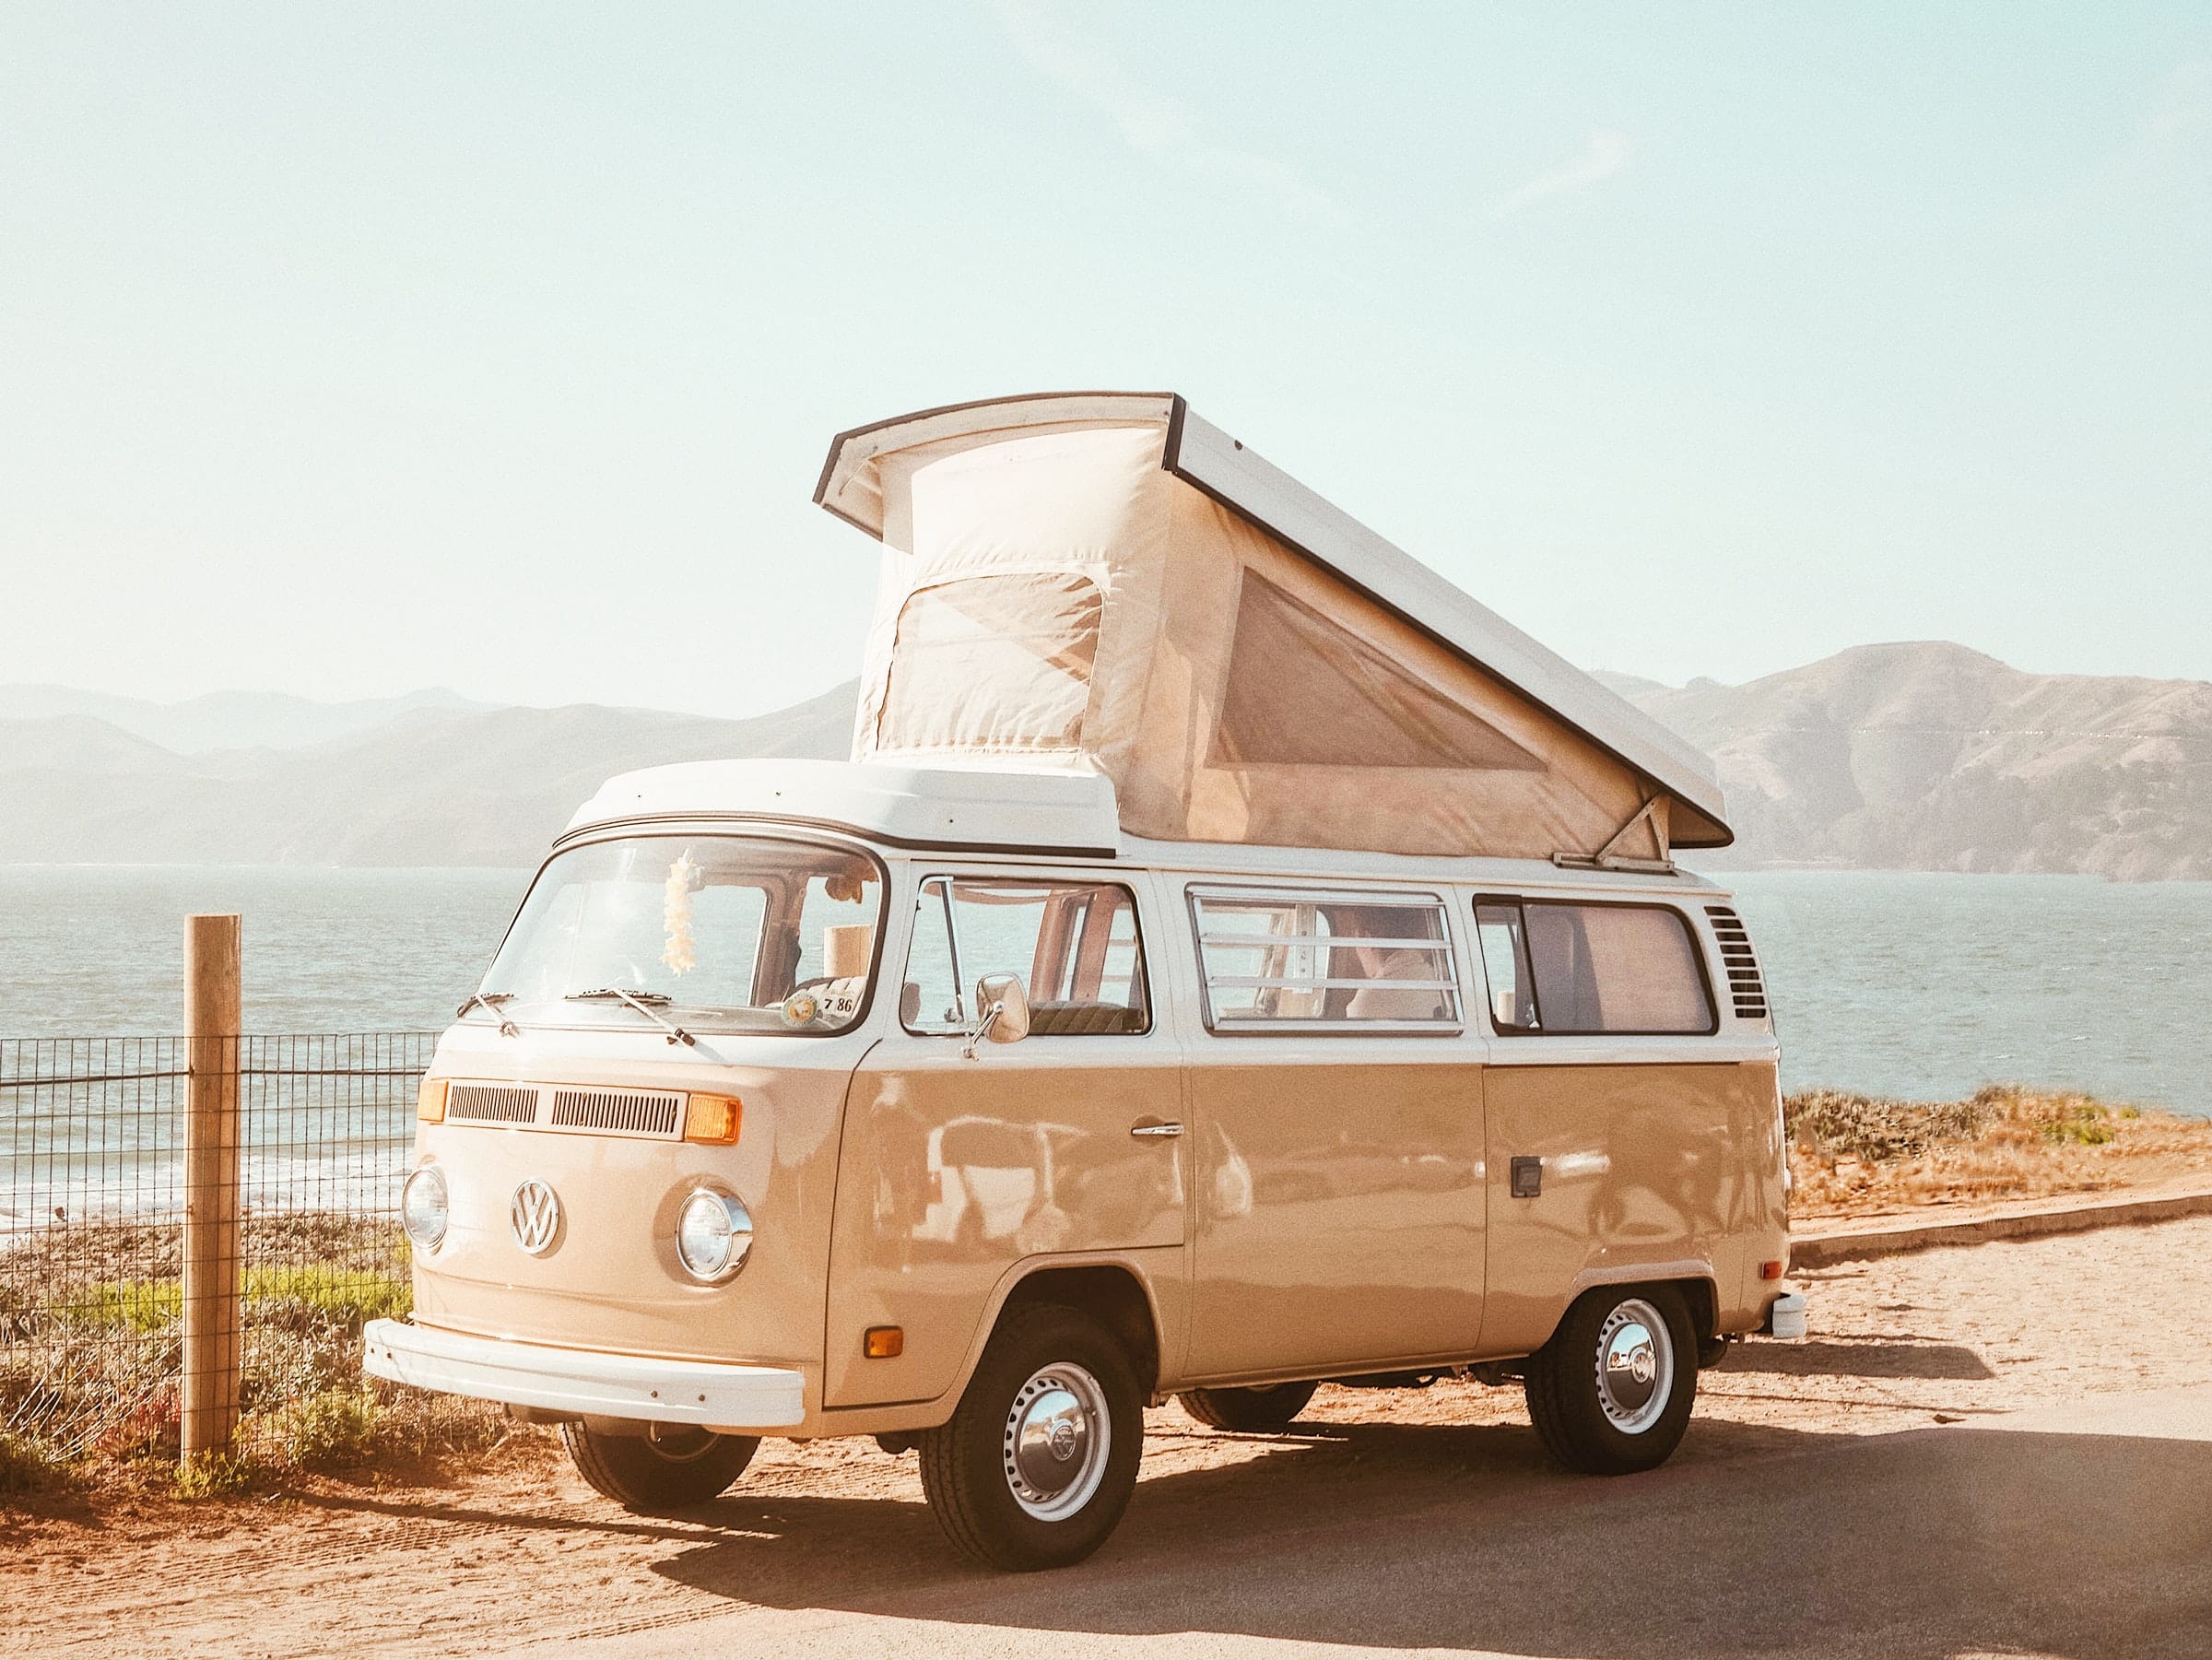 VANLIFE started in the 60's - when hippies were looking for a cheap way to live